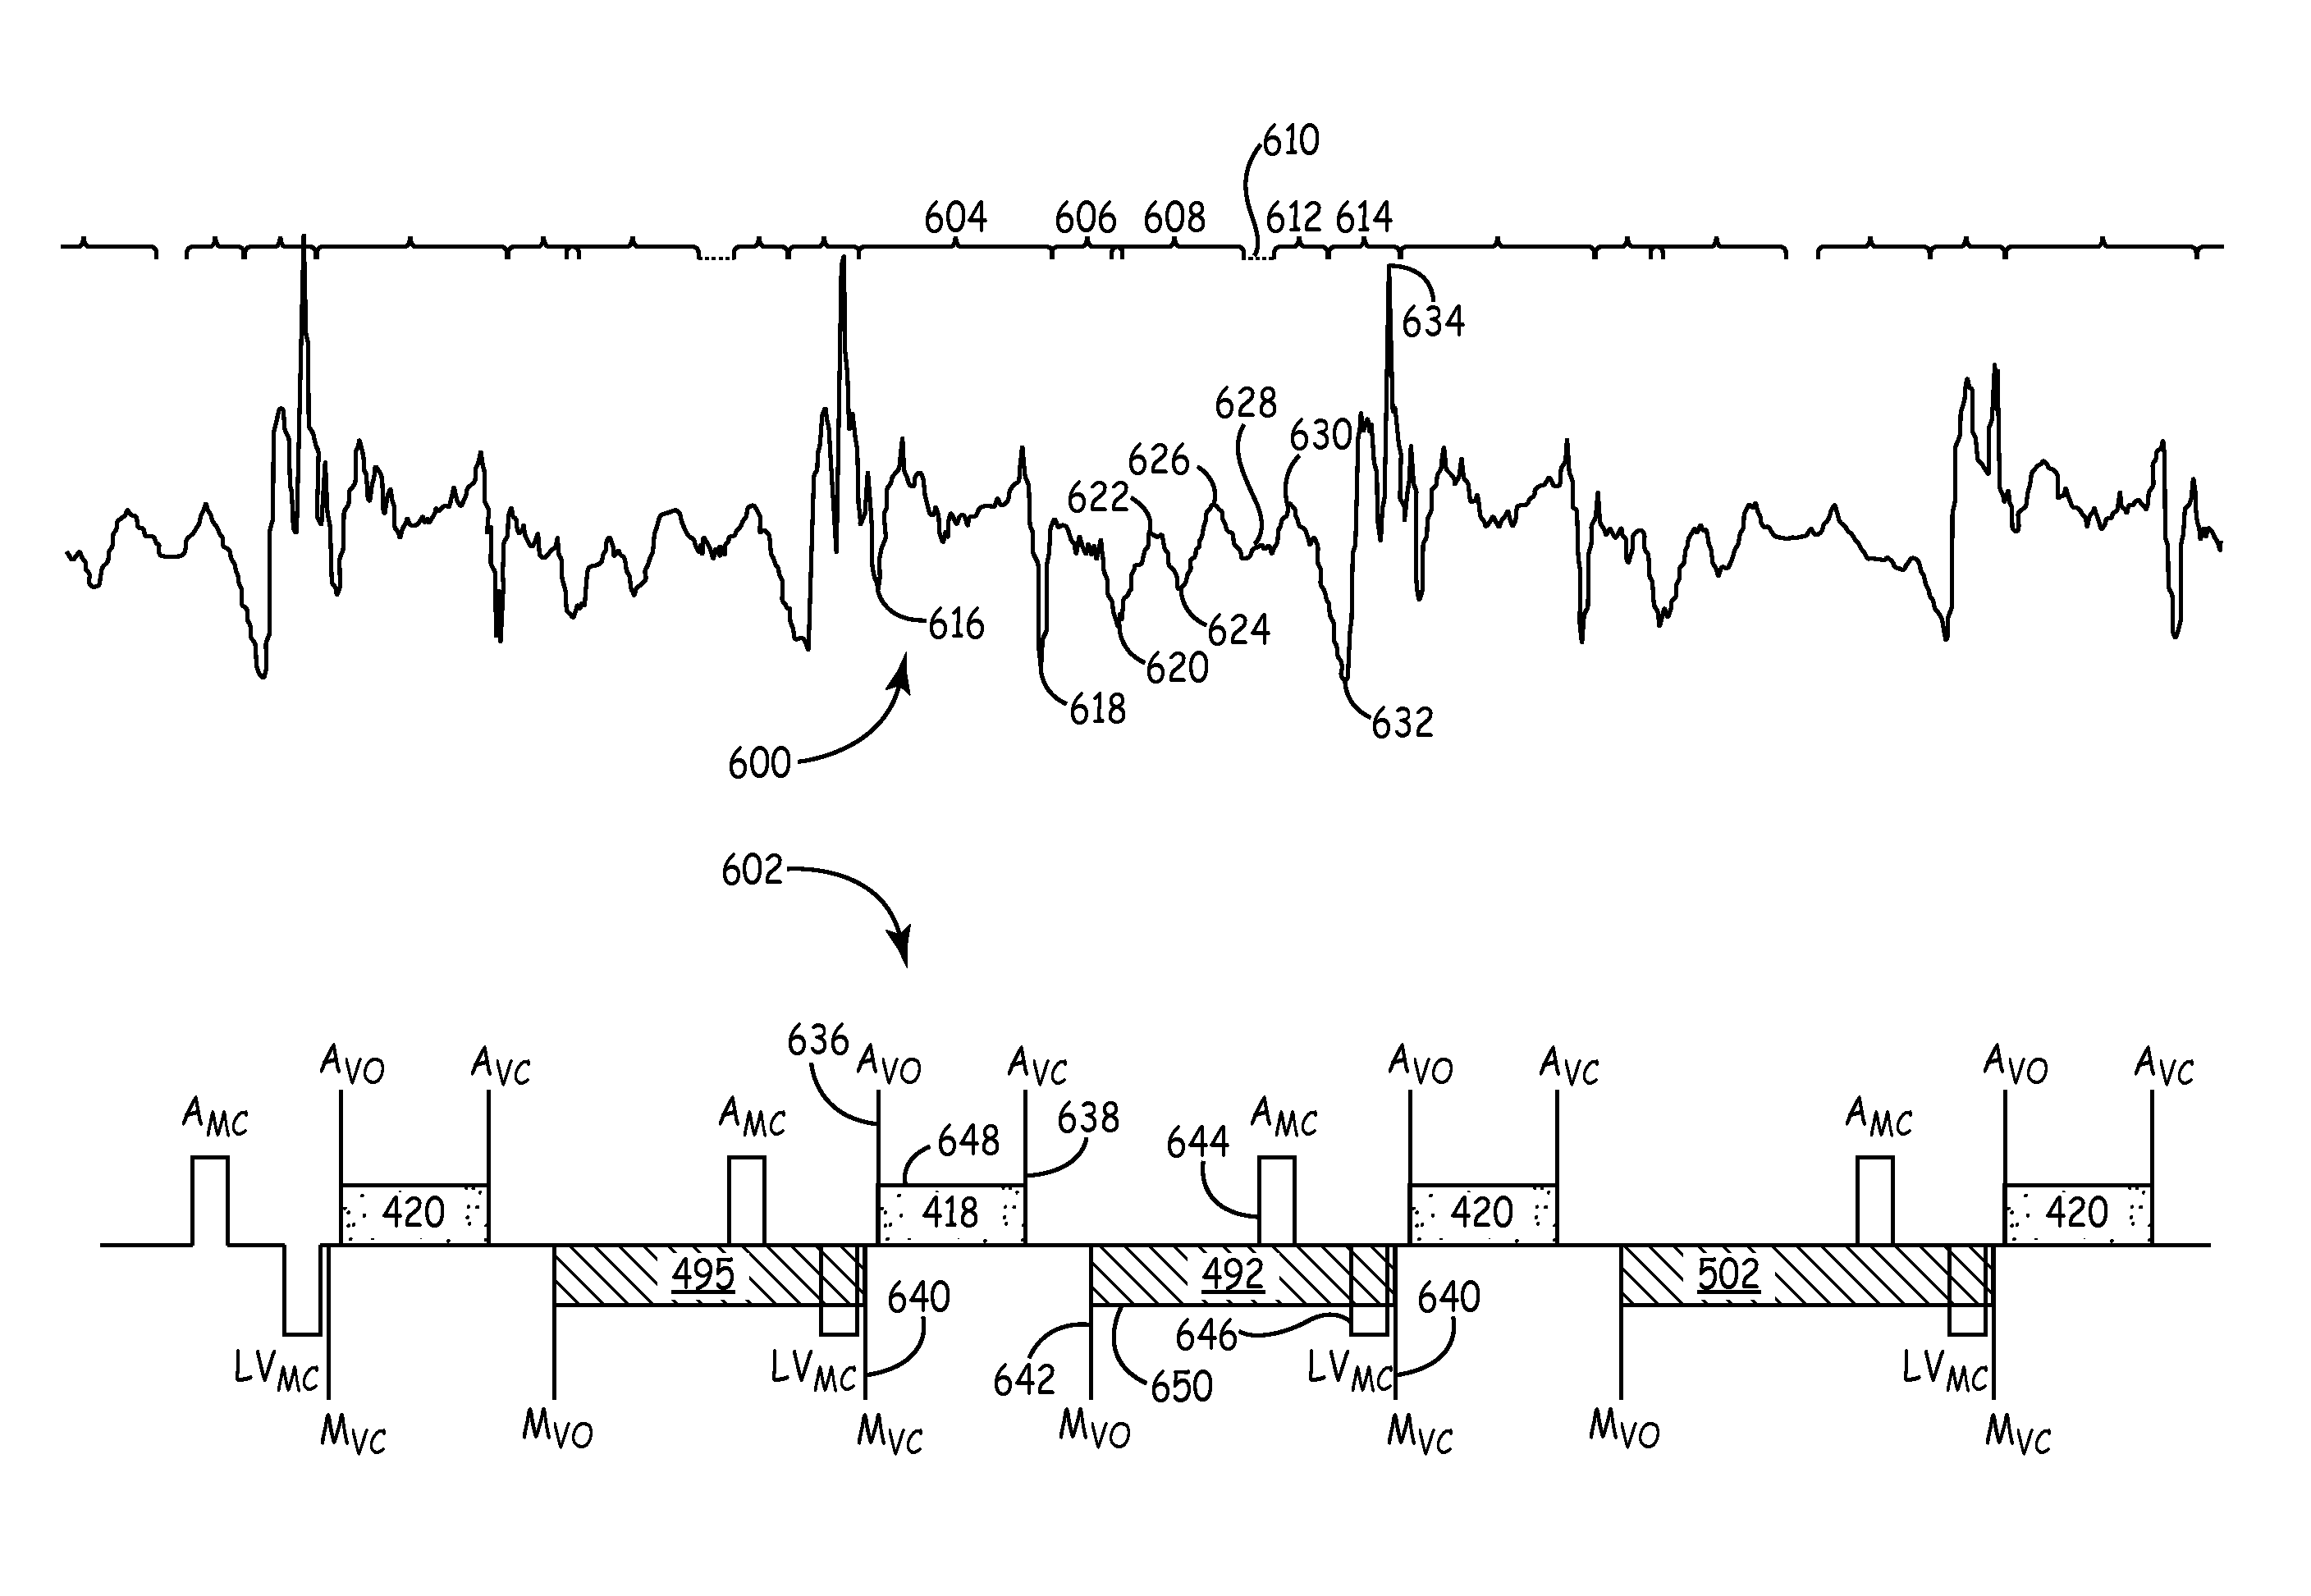 Mechanical function marker channel for cardiac monitoring and therapy control